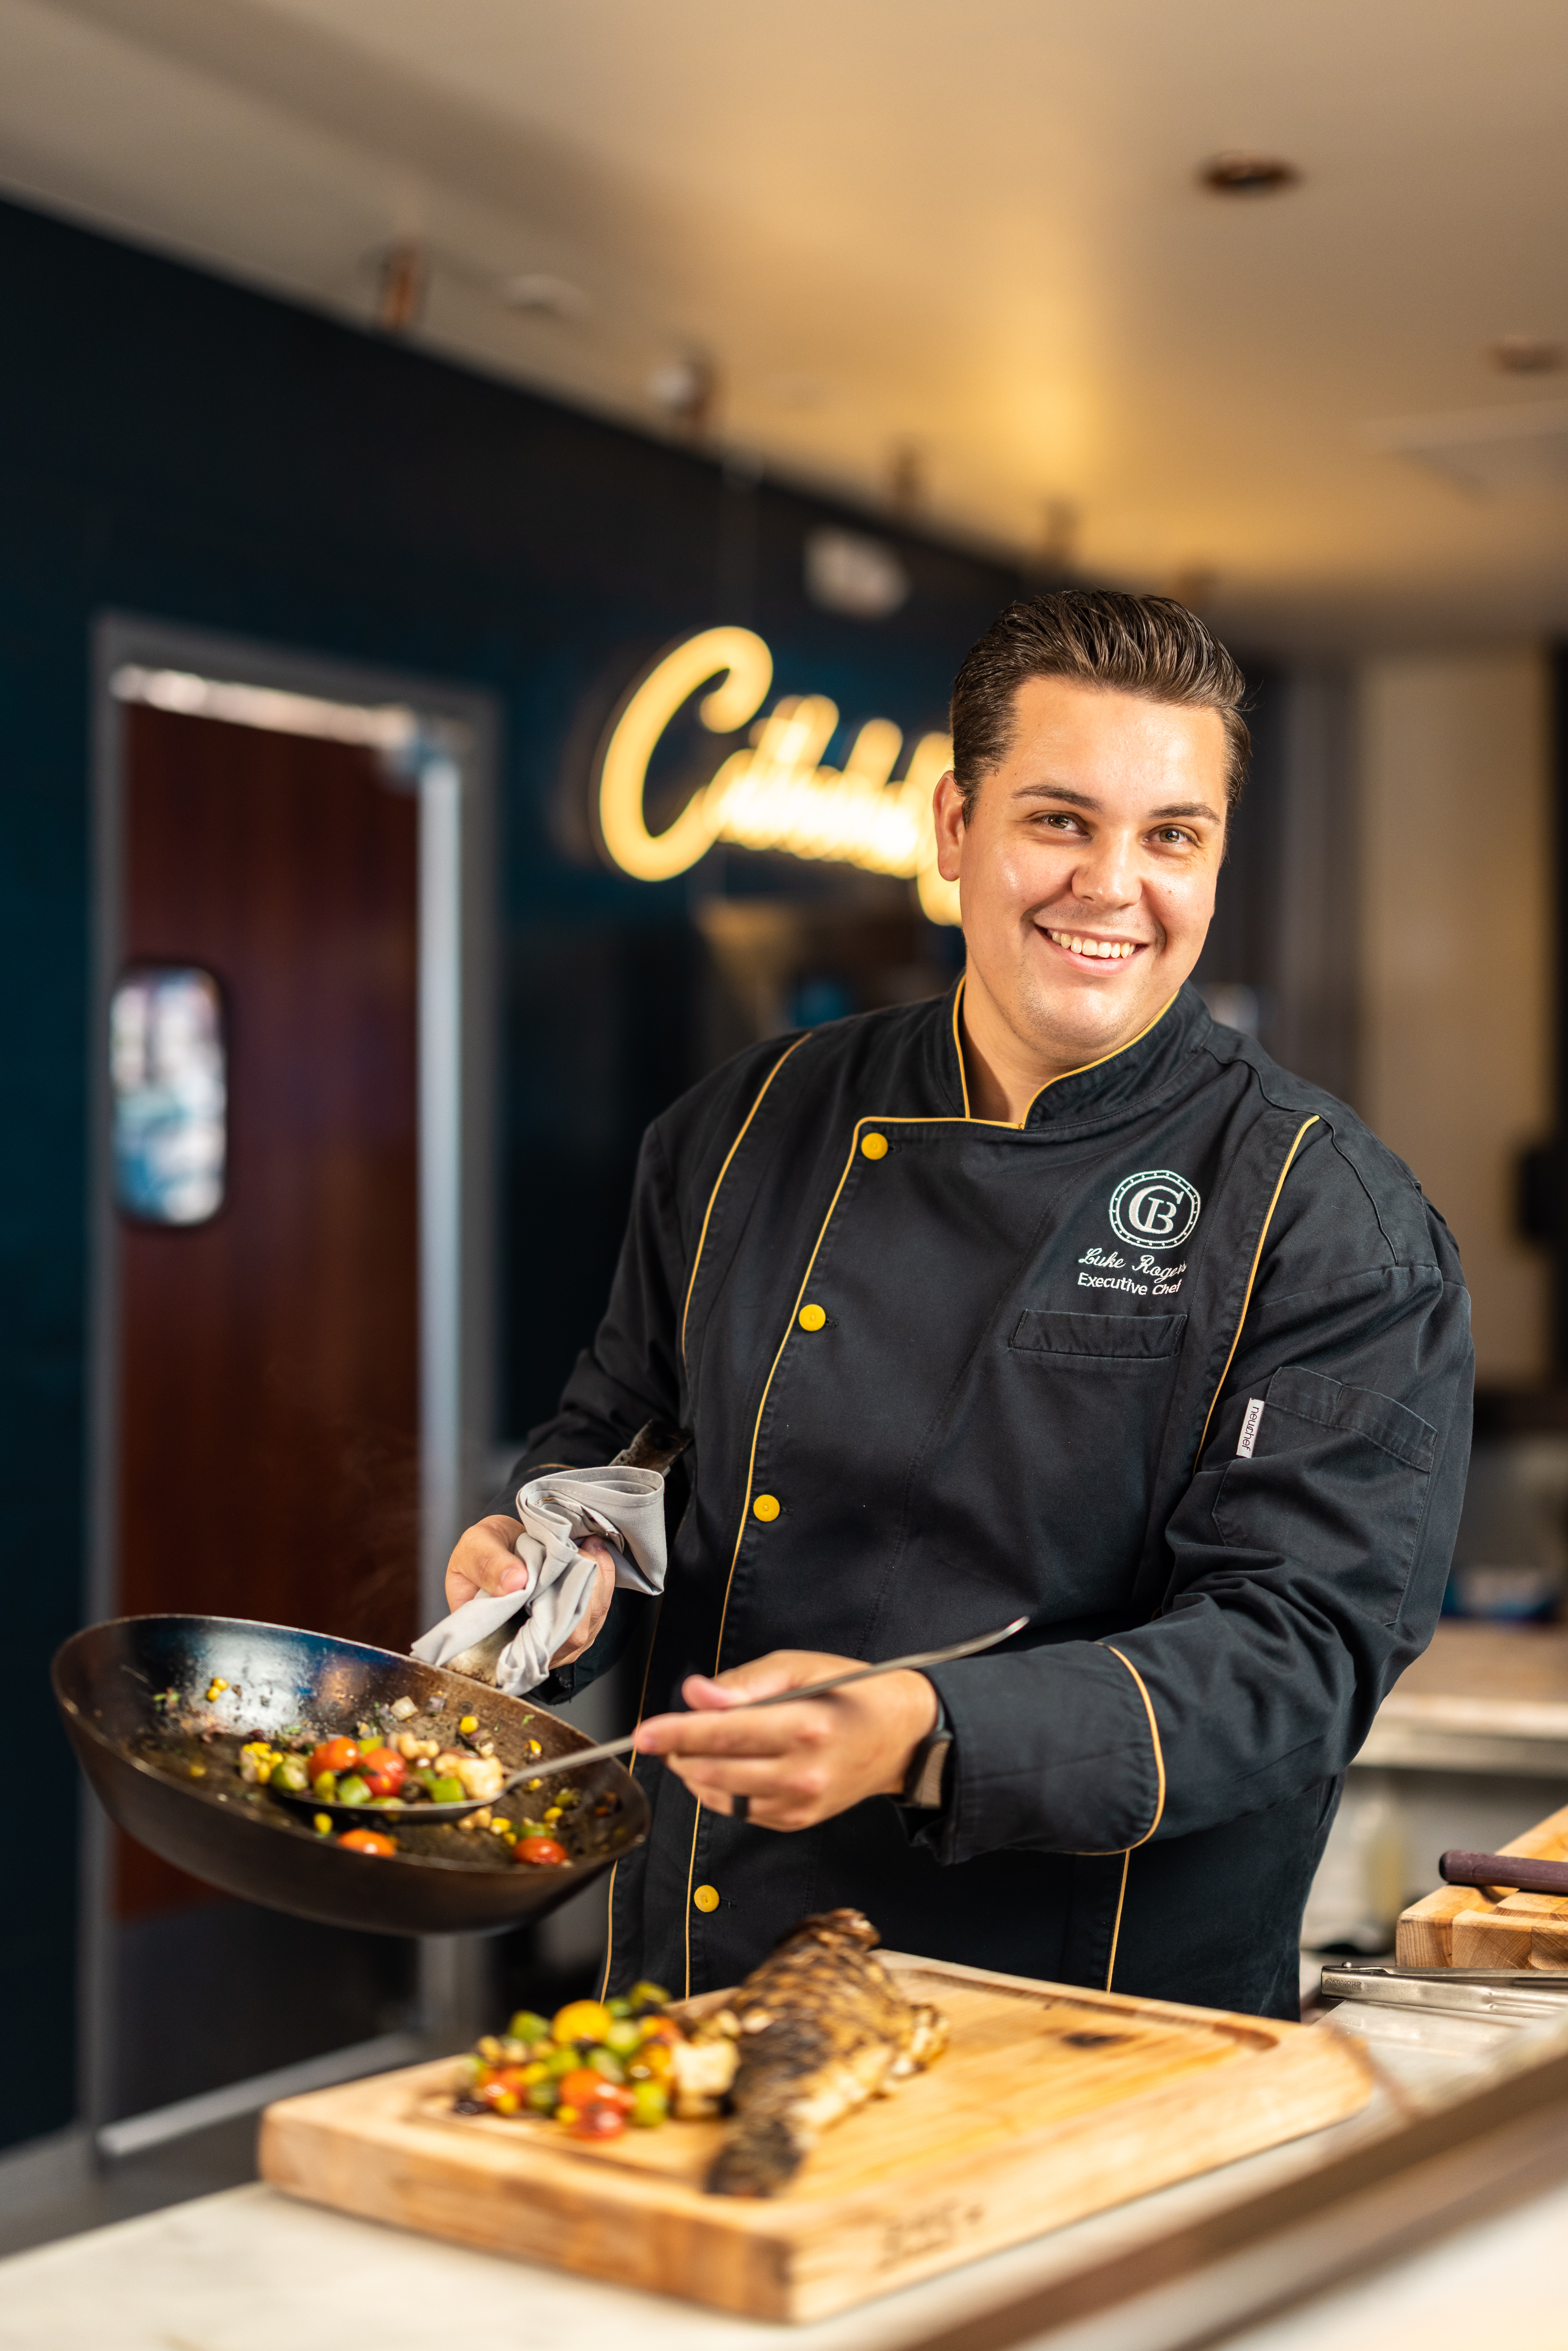 A chef in a black jacket holds a wok with cooking vegetables and smiles directly at the camera. 